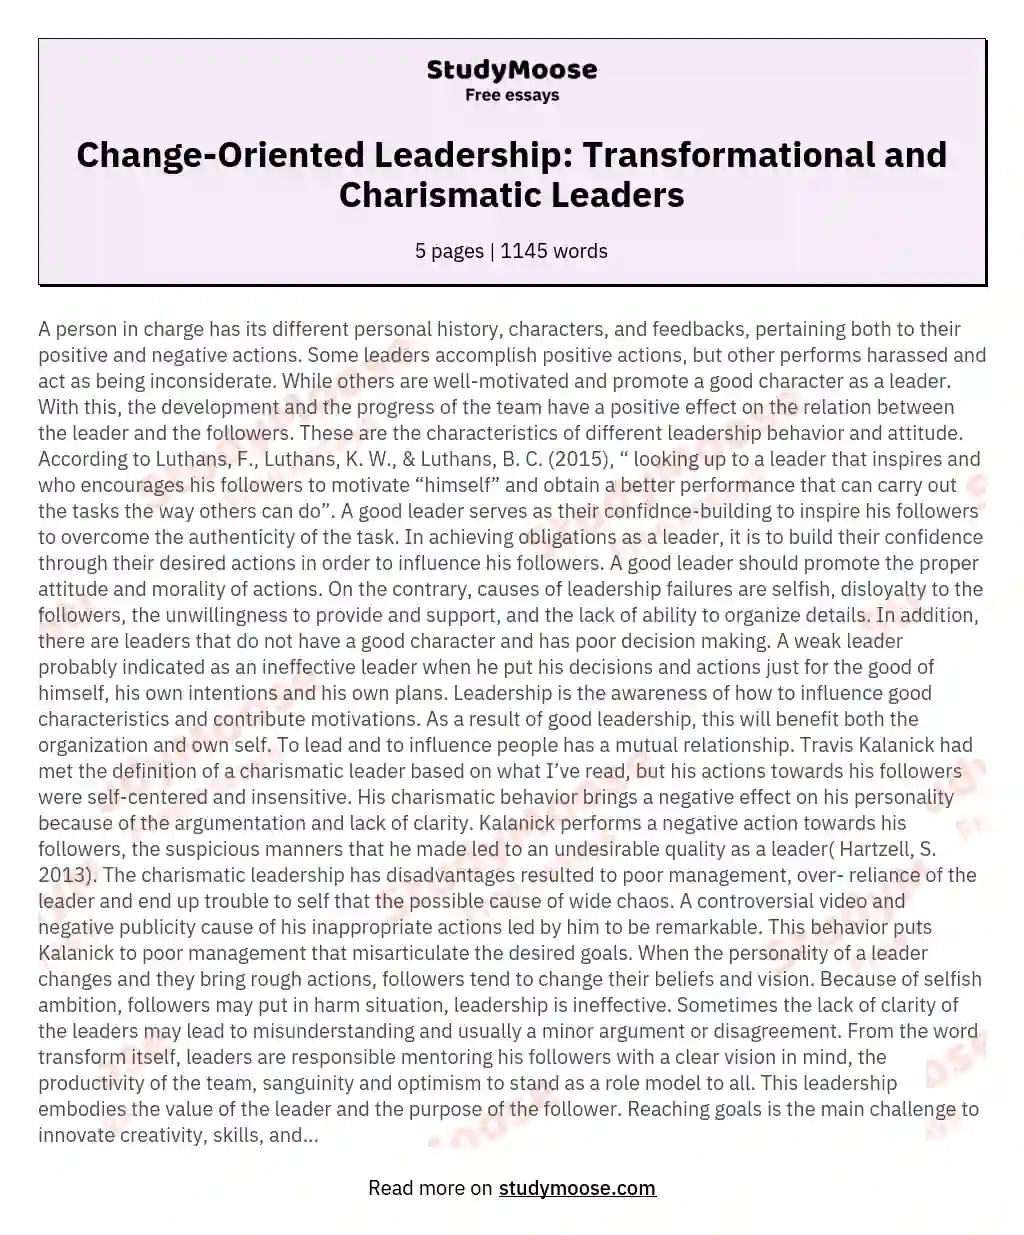 Change-Oriented Leadership: Transformational and Charismatic Leaders essay